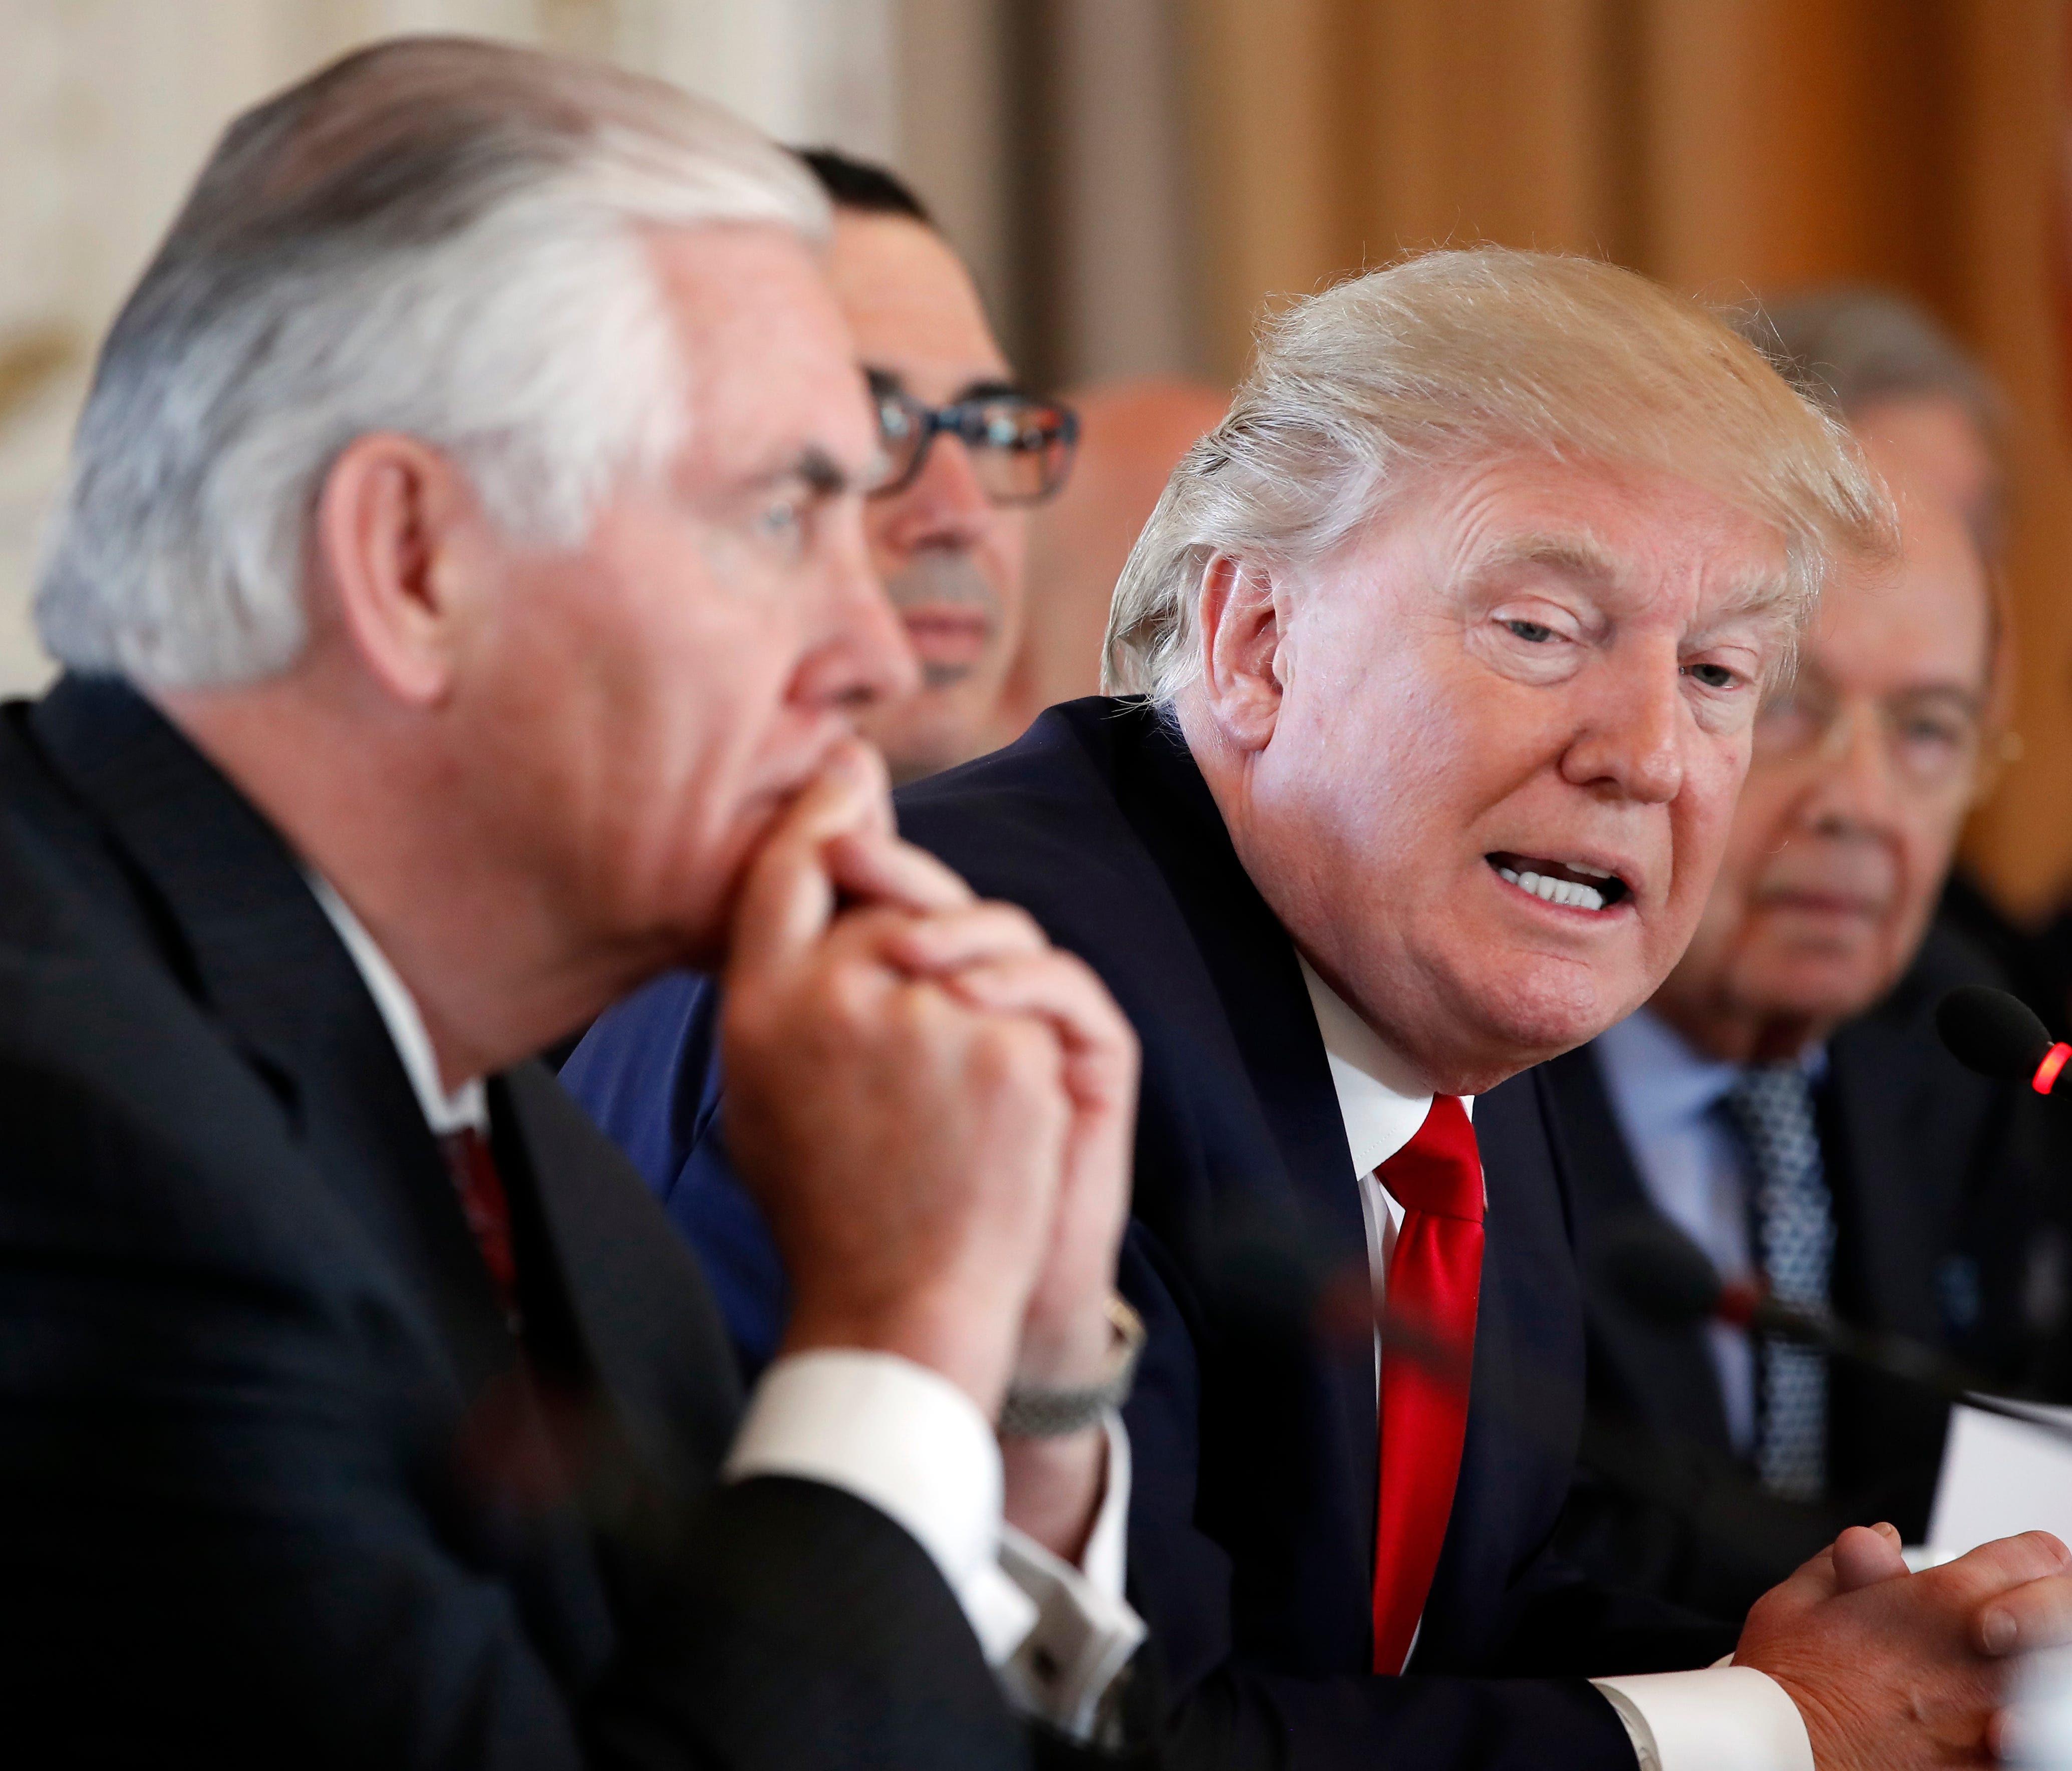 President Trump and Secretary of State Rex Tillerson at a meeting on April 7.